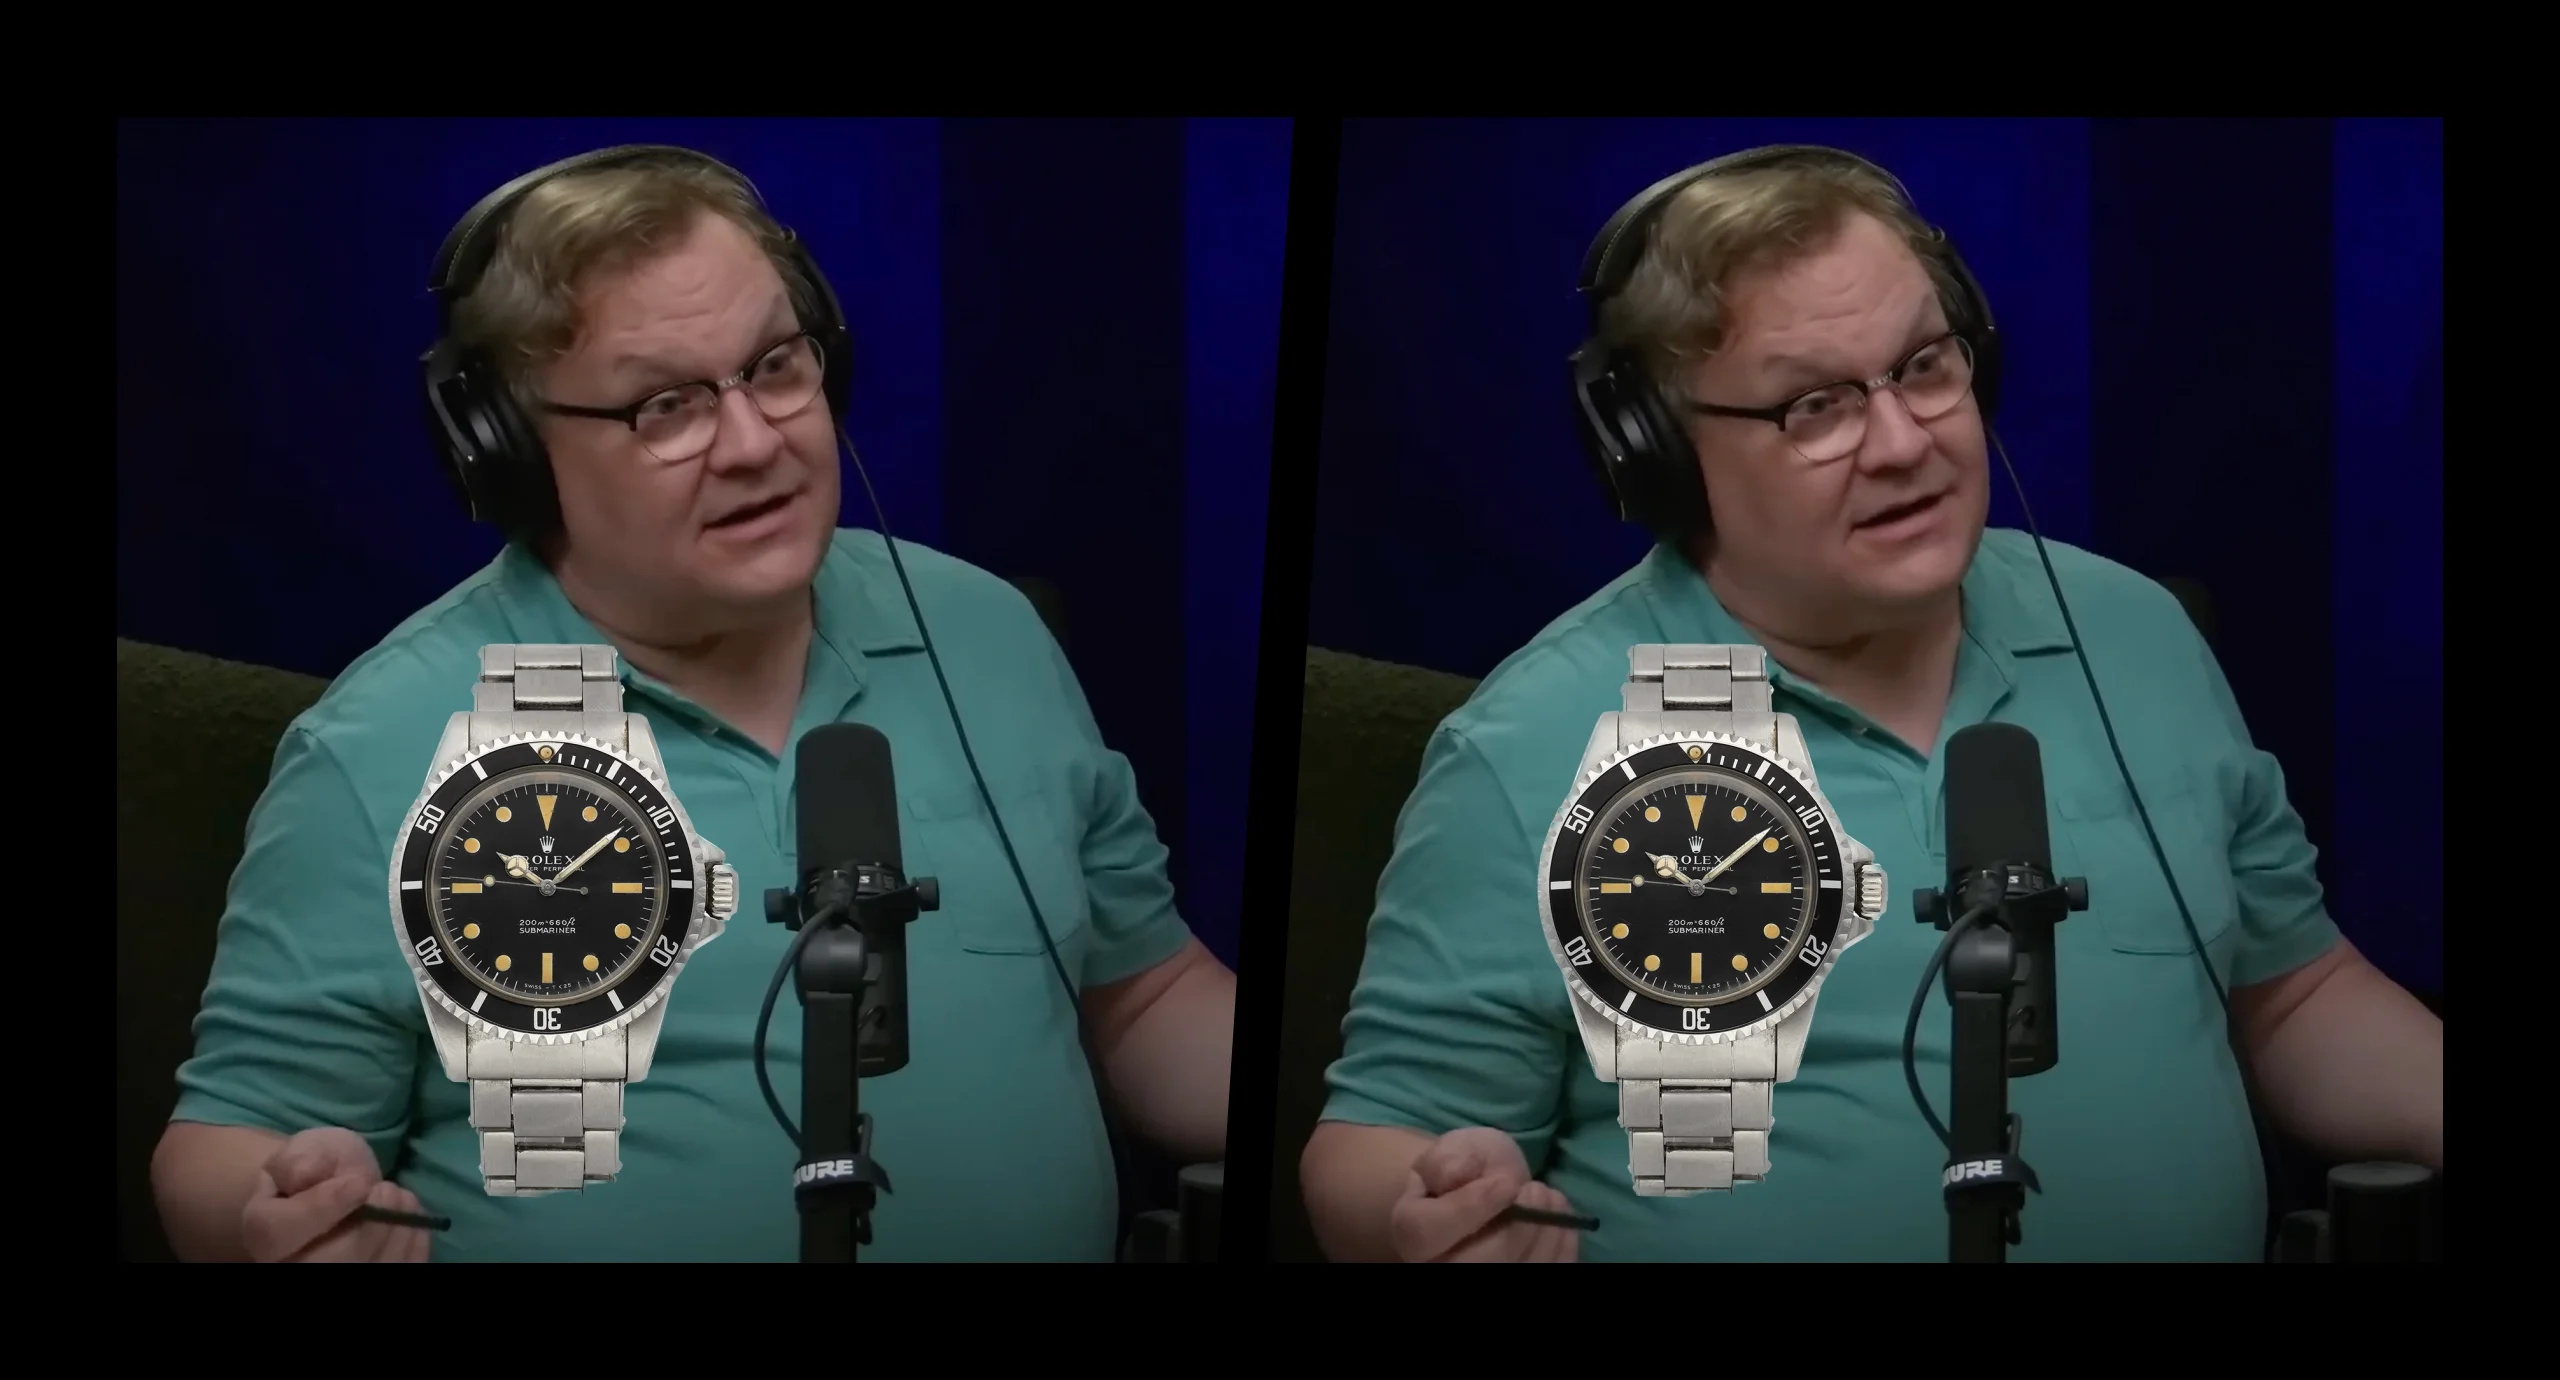 Andy Richter shares the painful story of how his Rolex, gifted to him by Conan O’Brien, was stolen